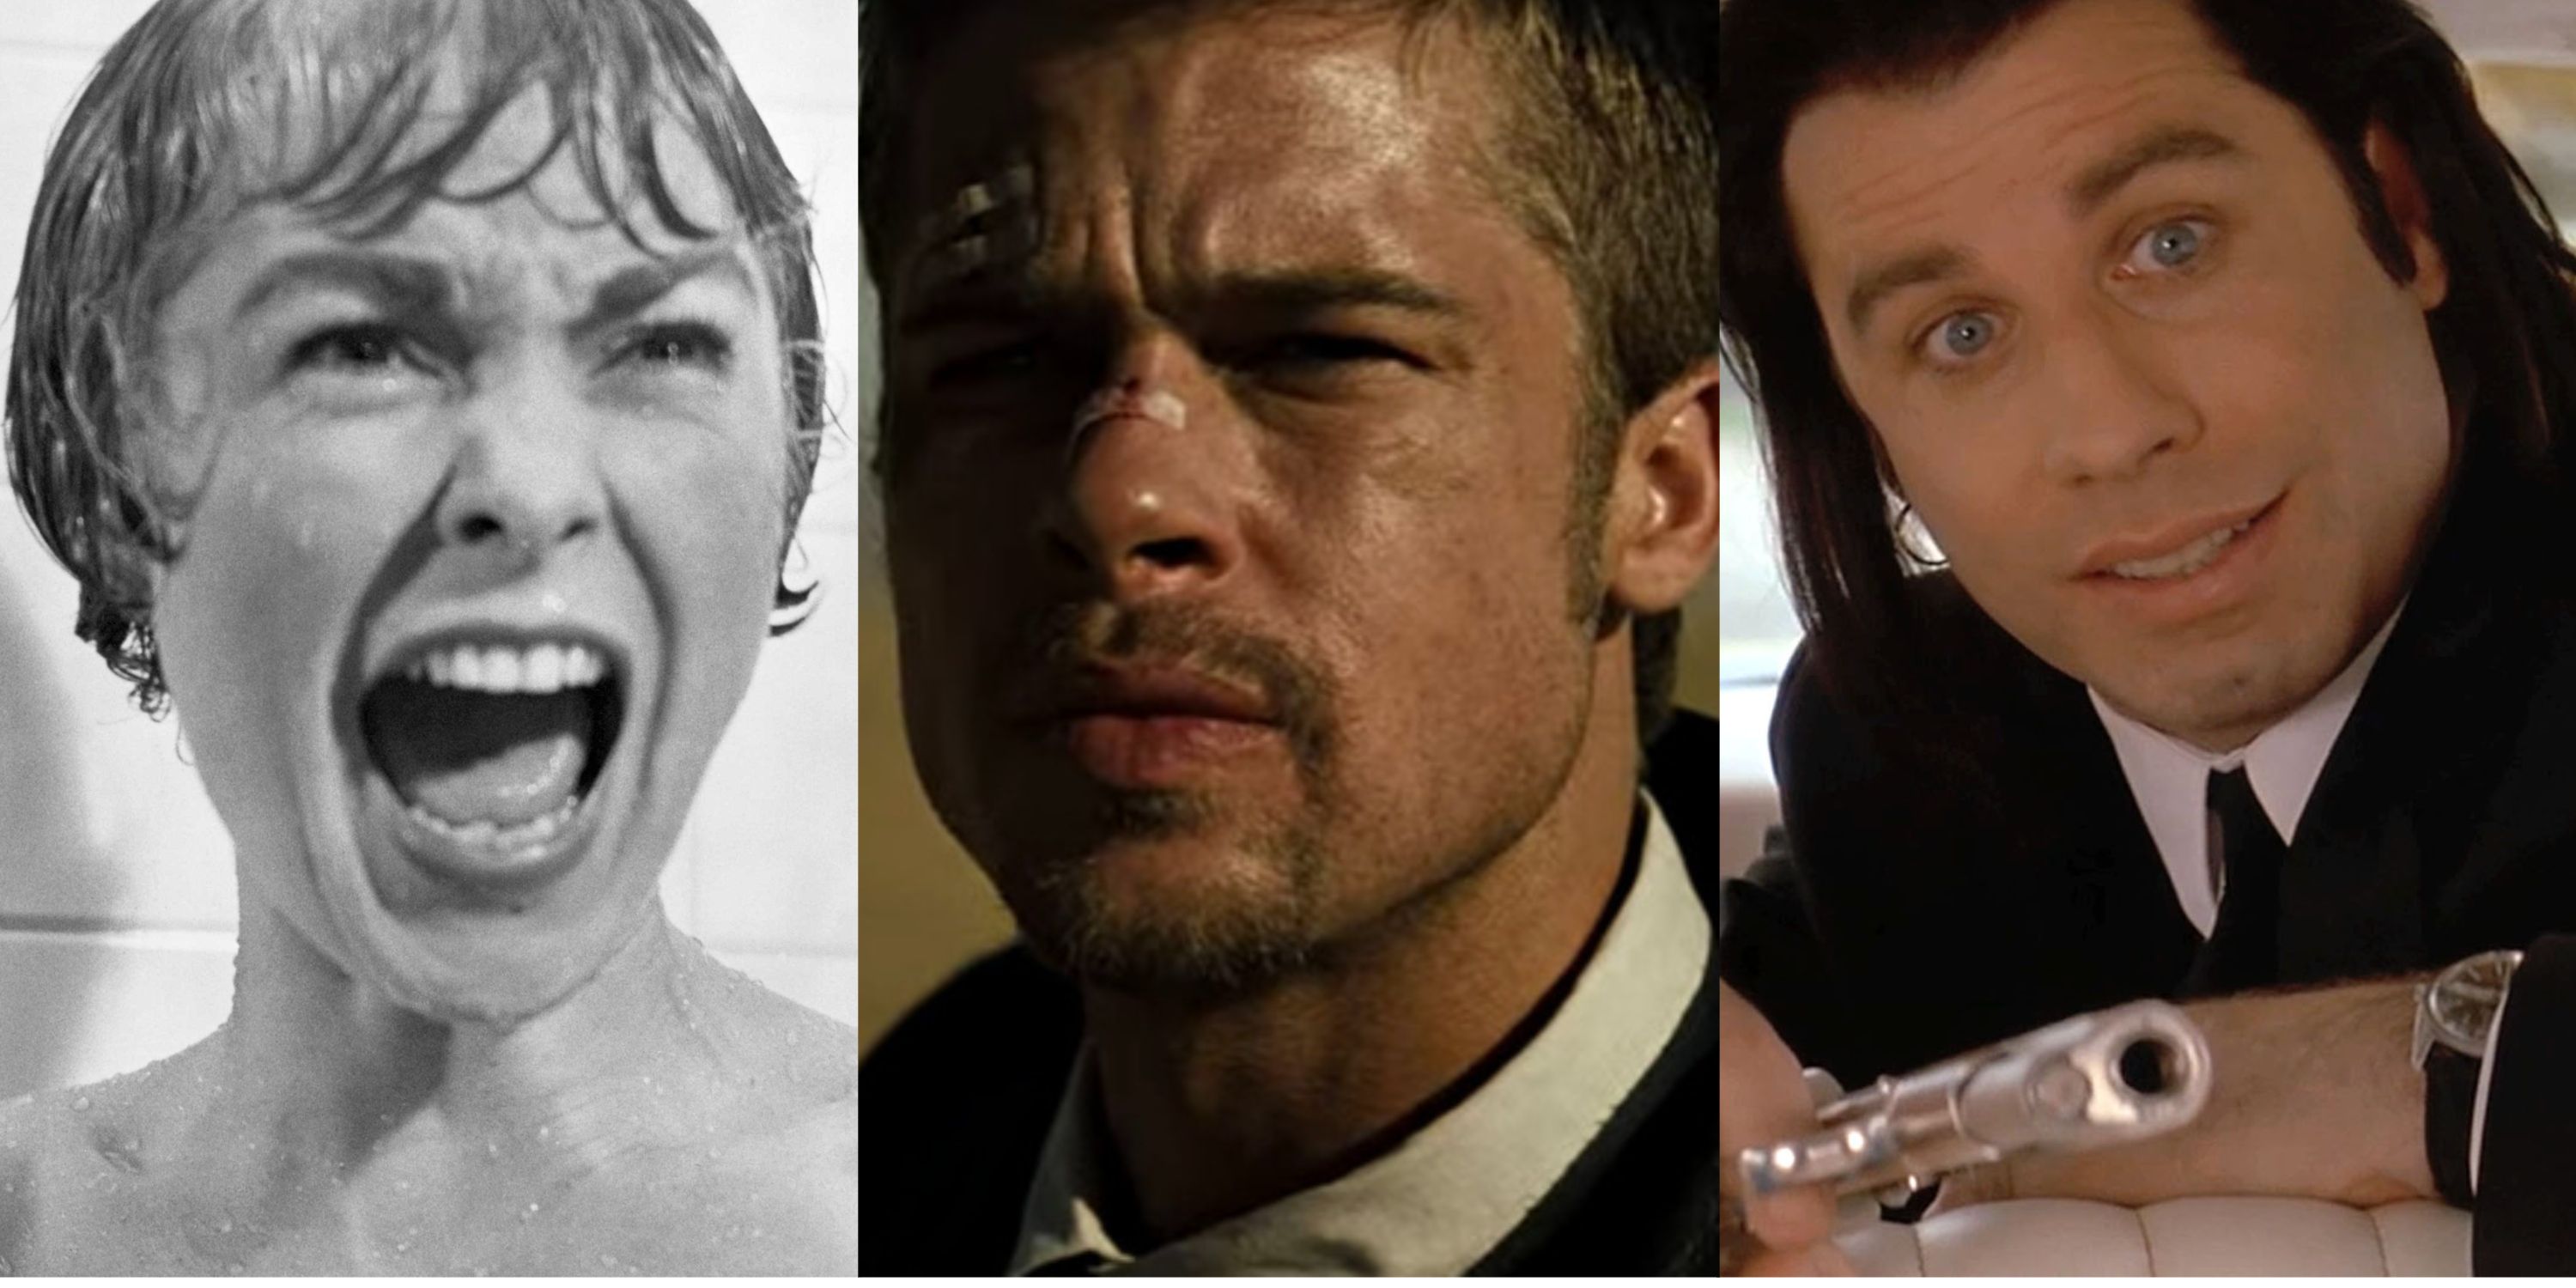 A split image of Janet Leigh in Psycho, Brad Pitt in Seven, and John Travolta in Pulp Fiction